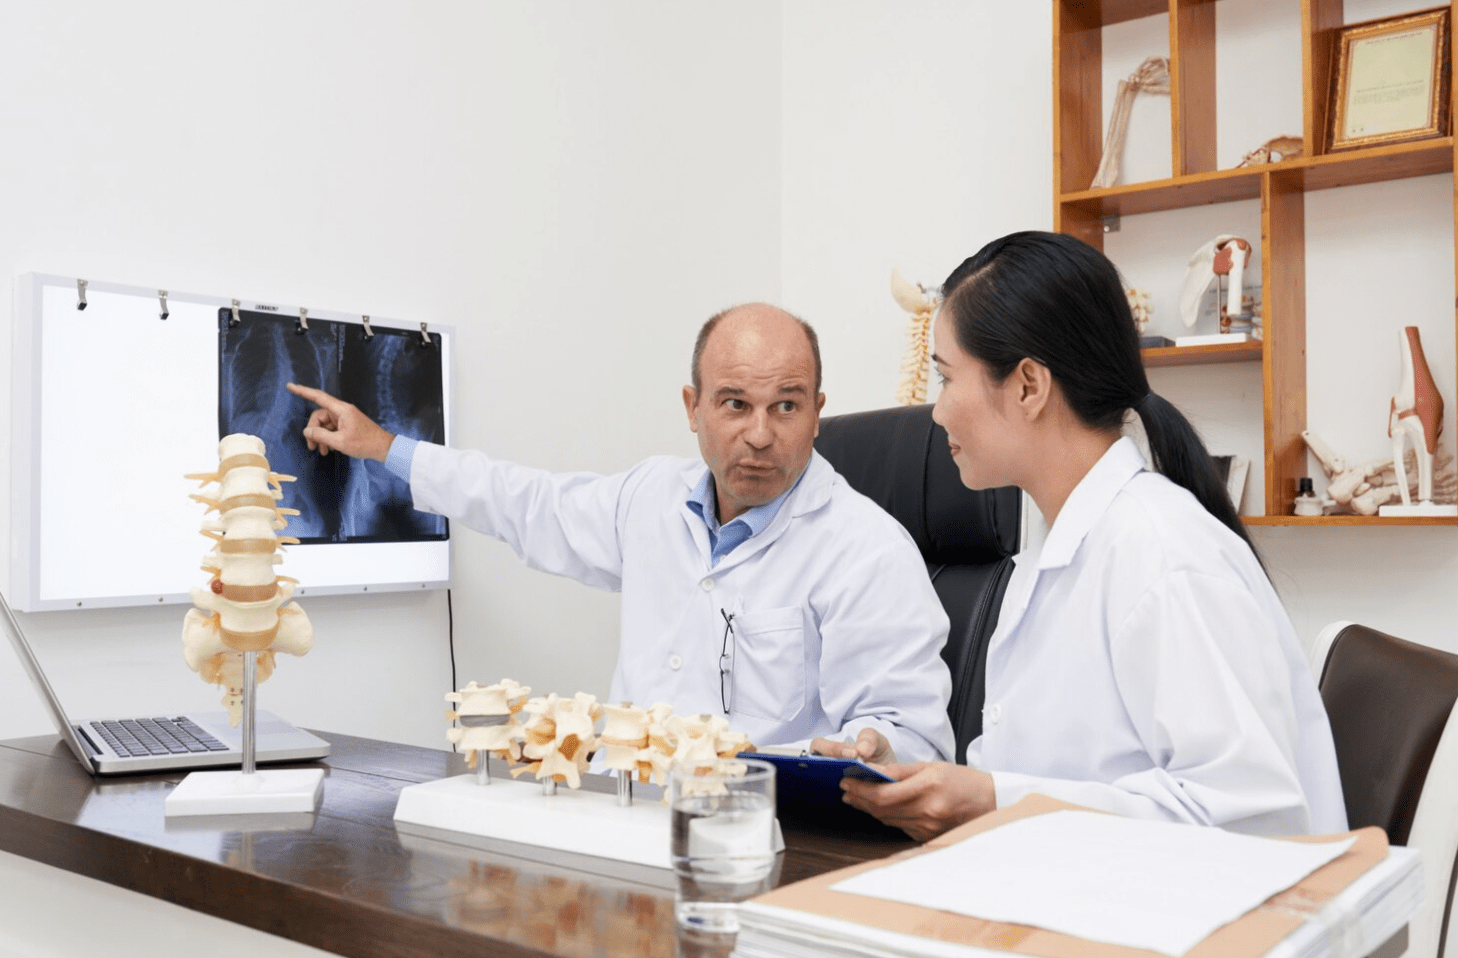 The Course of Treatment for Degenerative Disc Disease